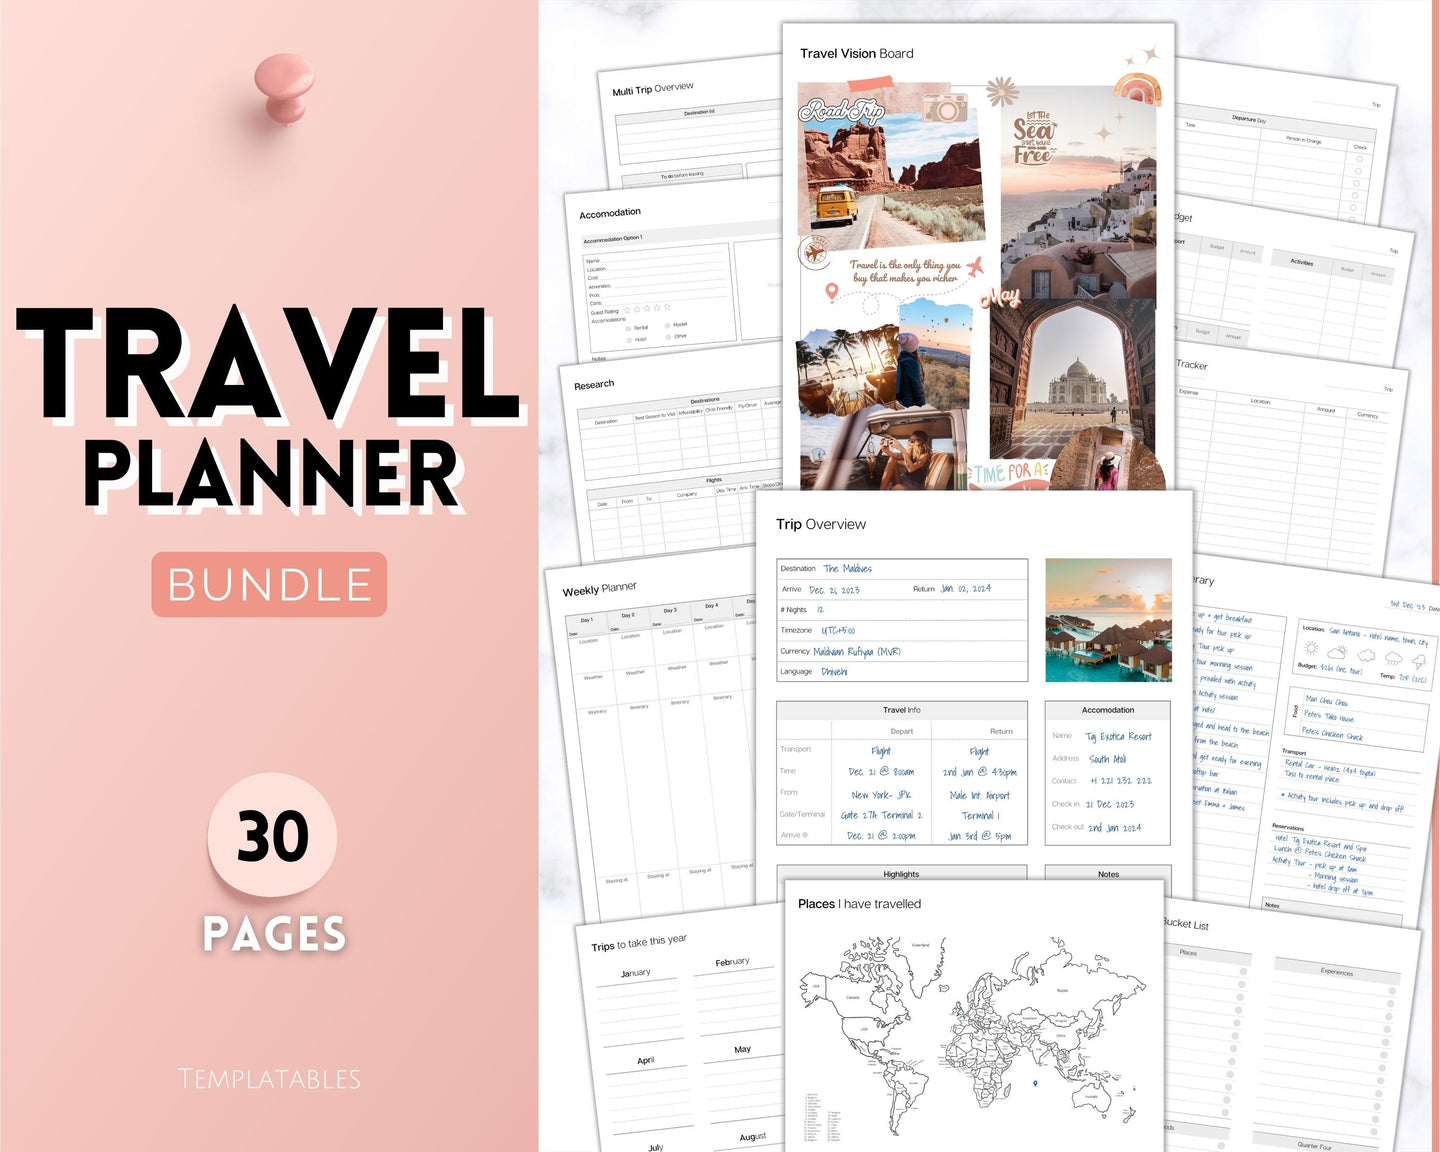 Ultimate Travel Planner Bundle | 30 Templates for Trip and Vacation Planning, Roadtrip Diary, and Holiday Journal - Includes Packing Lists!